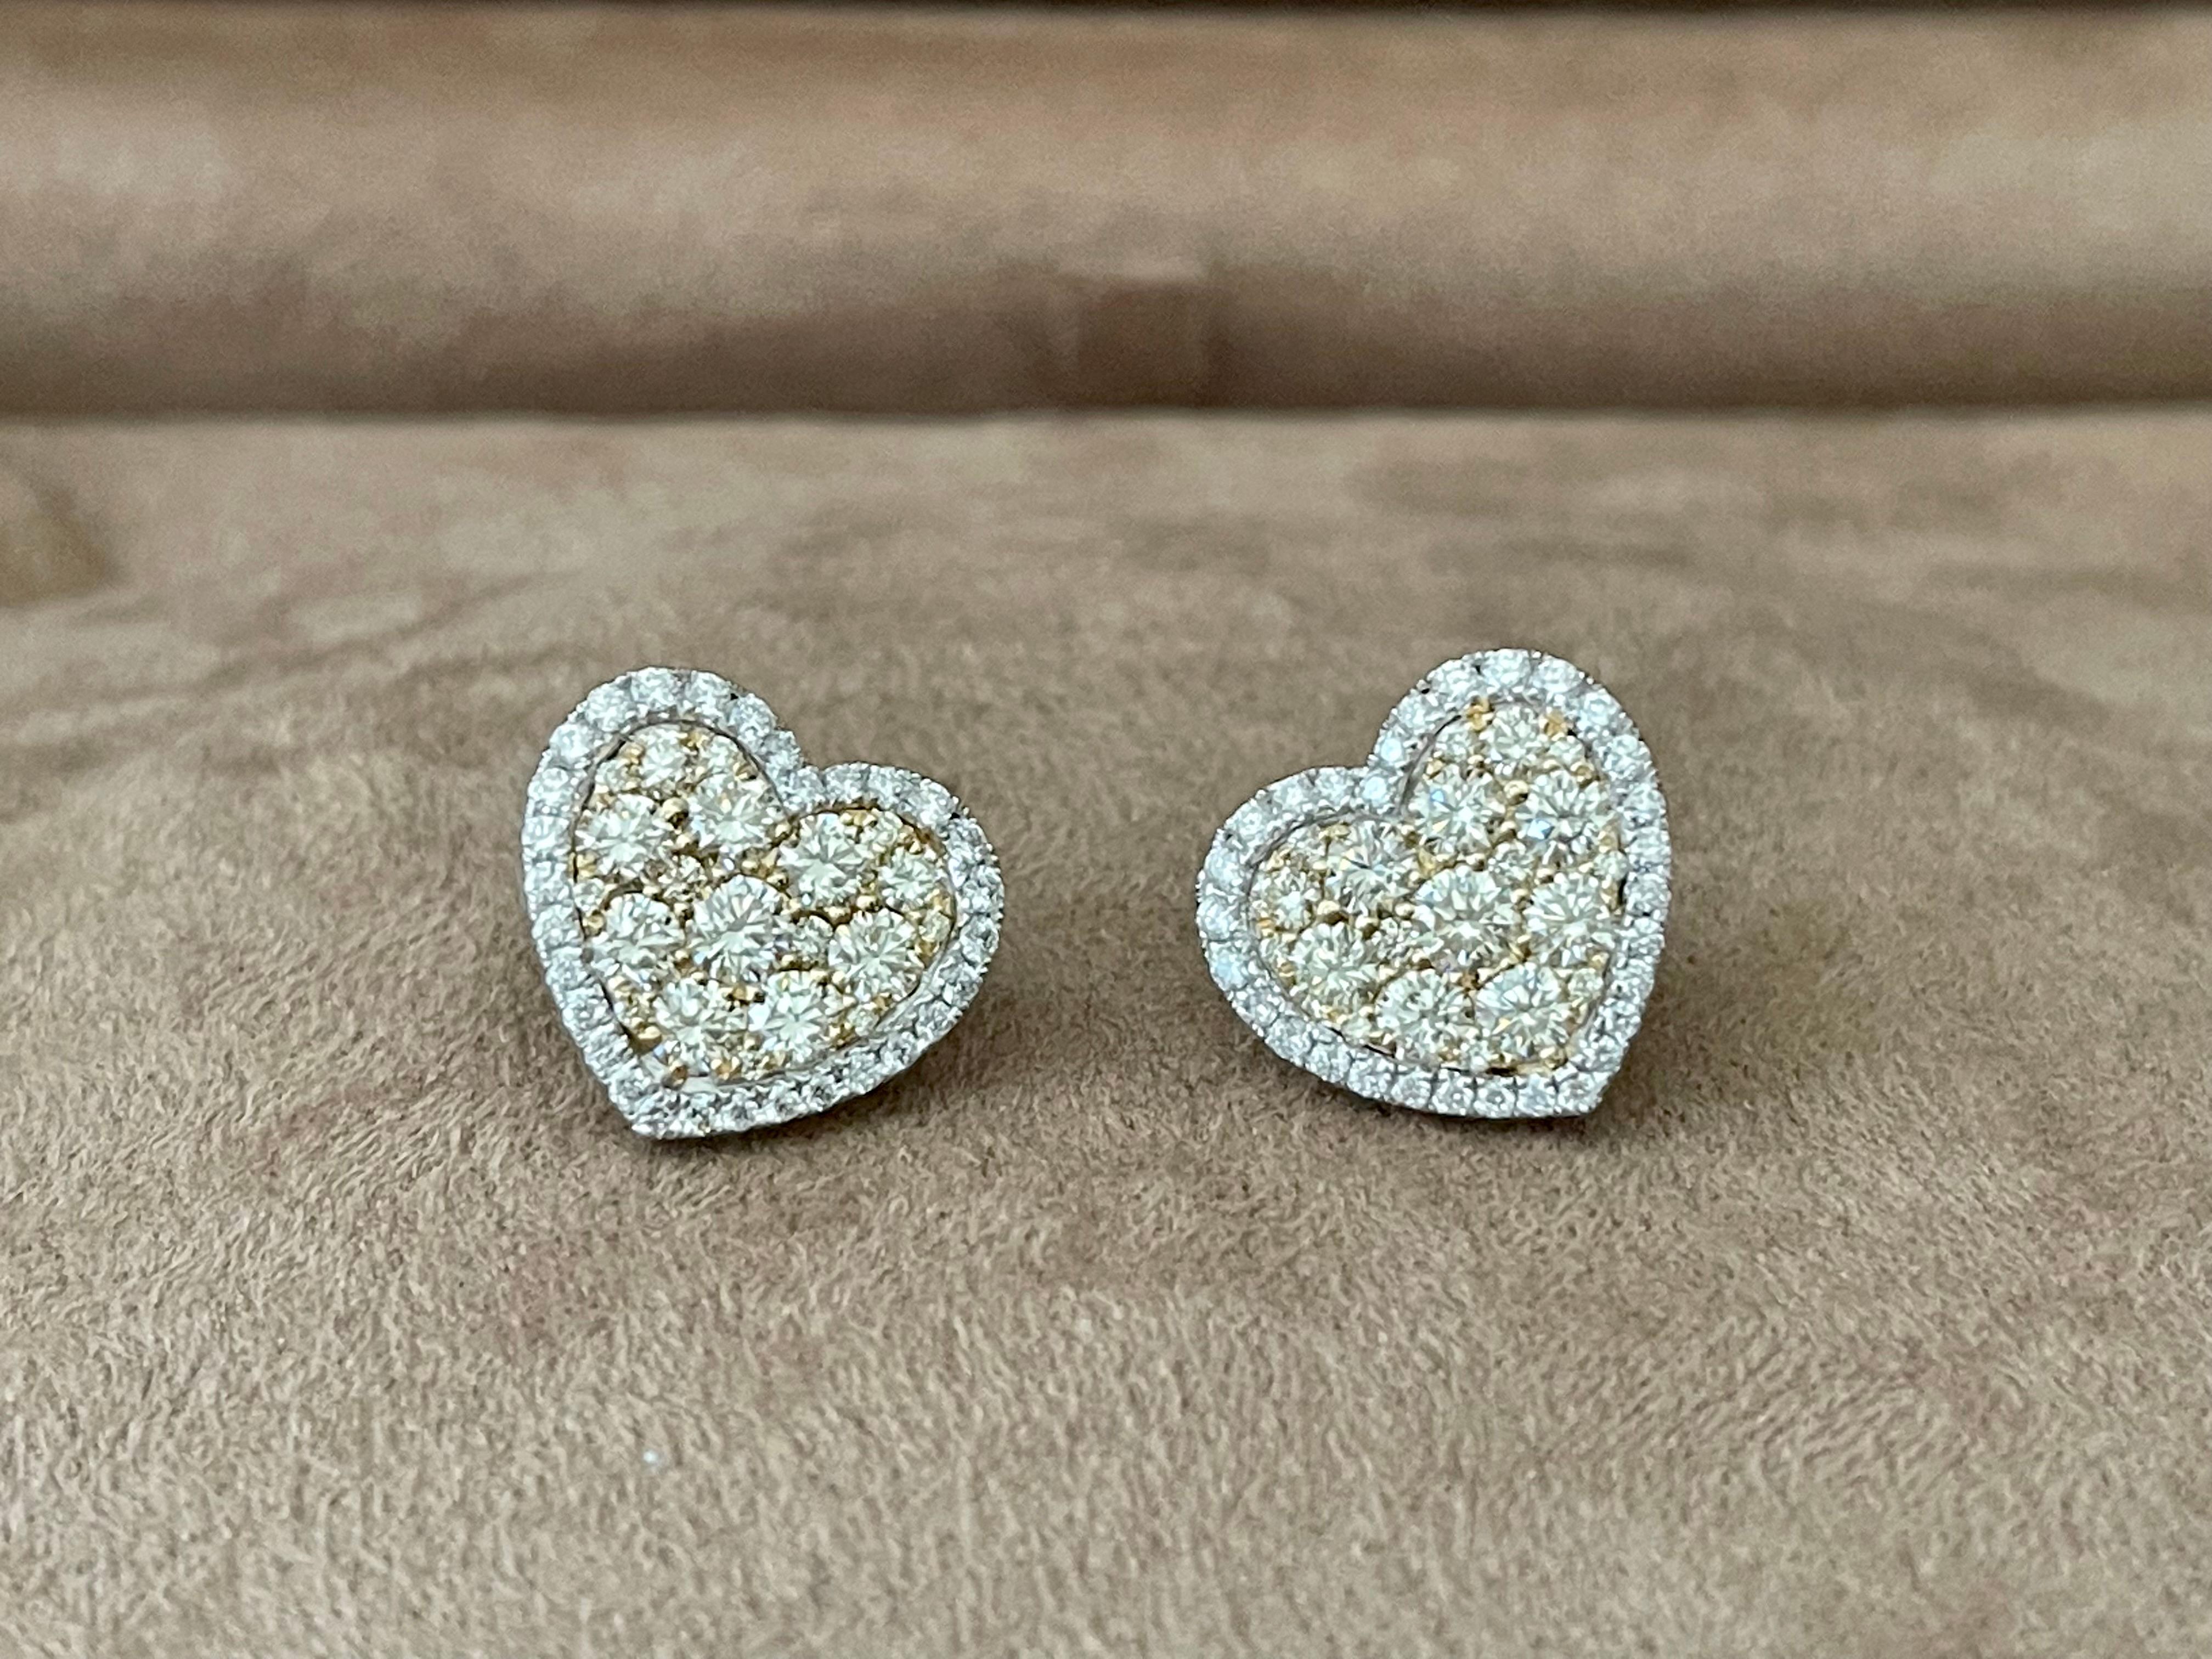 Stunningly sparkly pave set diamond and 14 K Gold heart earrings. These romantic feminine earrings are bursting with glittering diamonds The perfect symbol of love for that special someone in your life.
These absolutely gorgeous earrings feature an